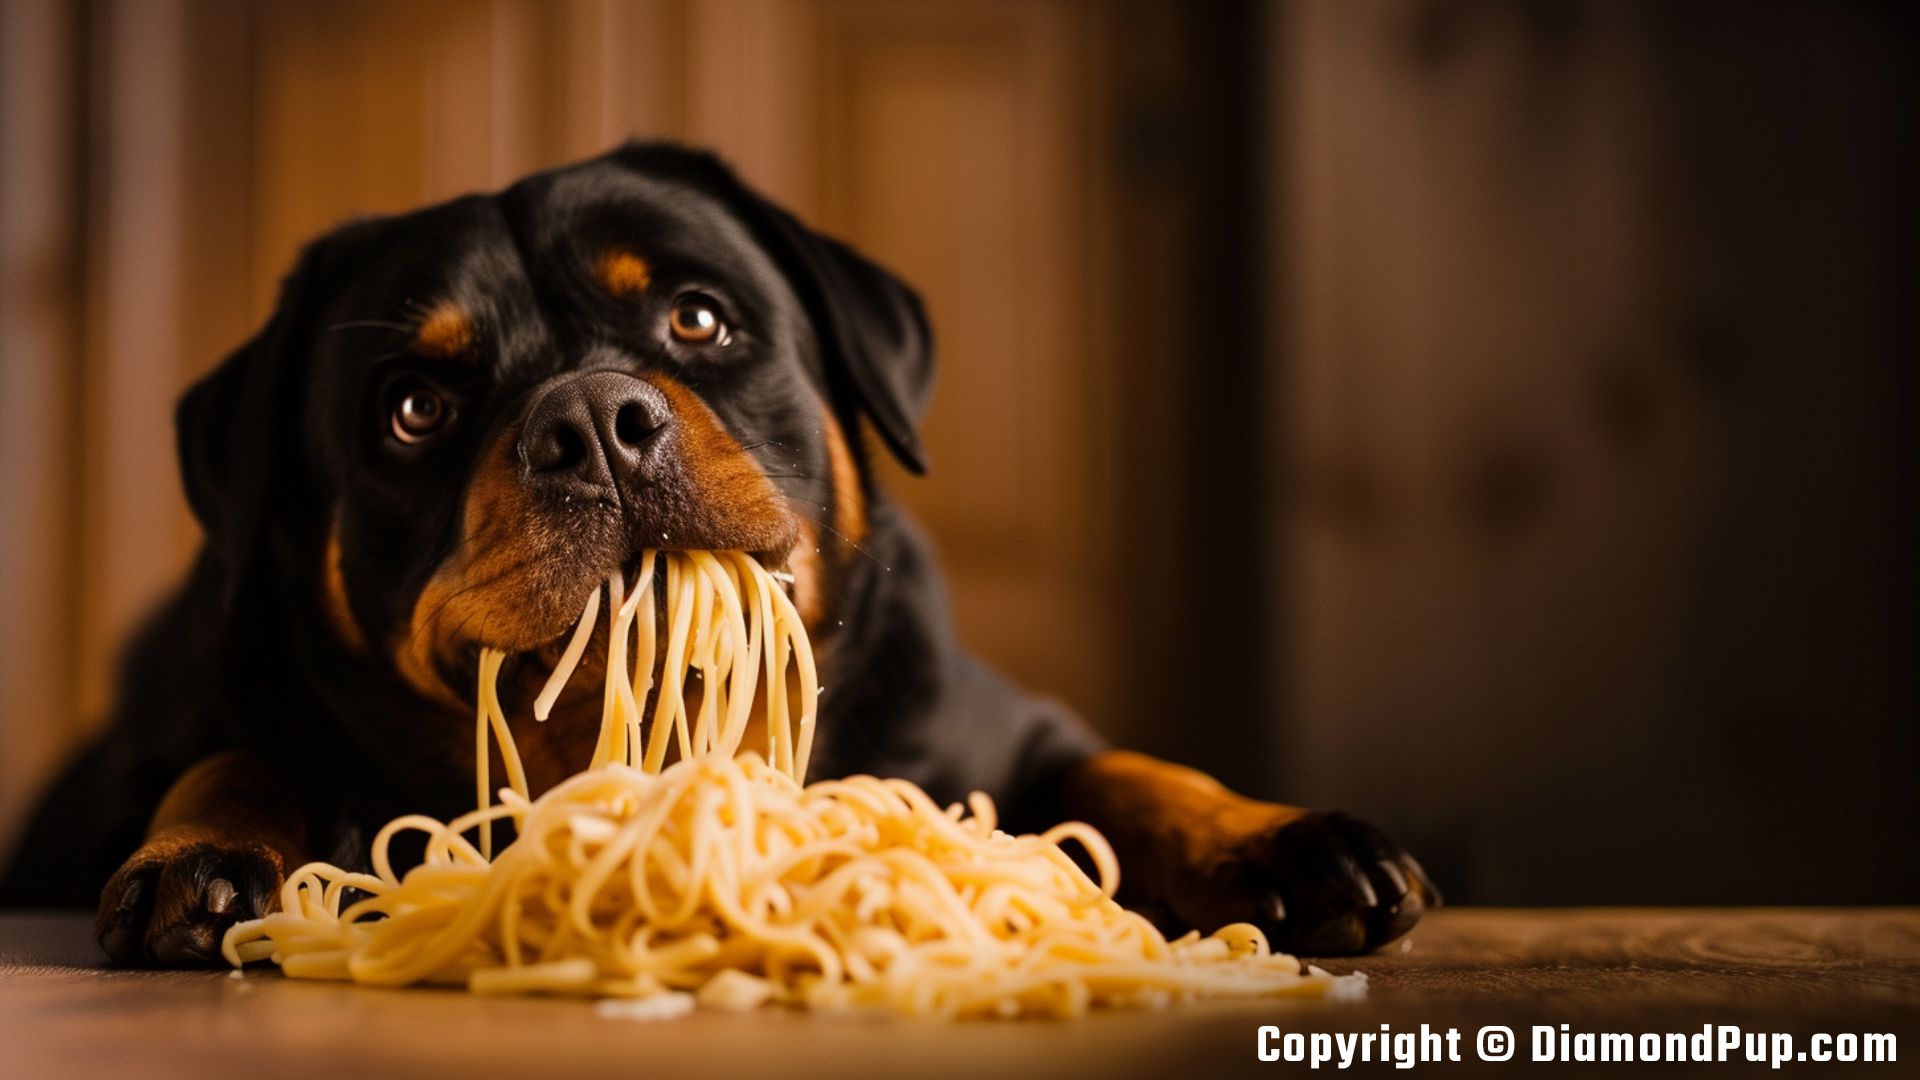 Photograph of a Playful Rottweiler Snacking on Pasta